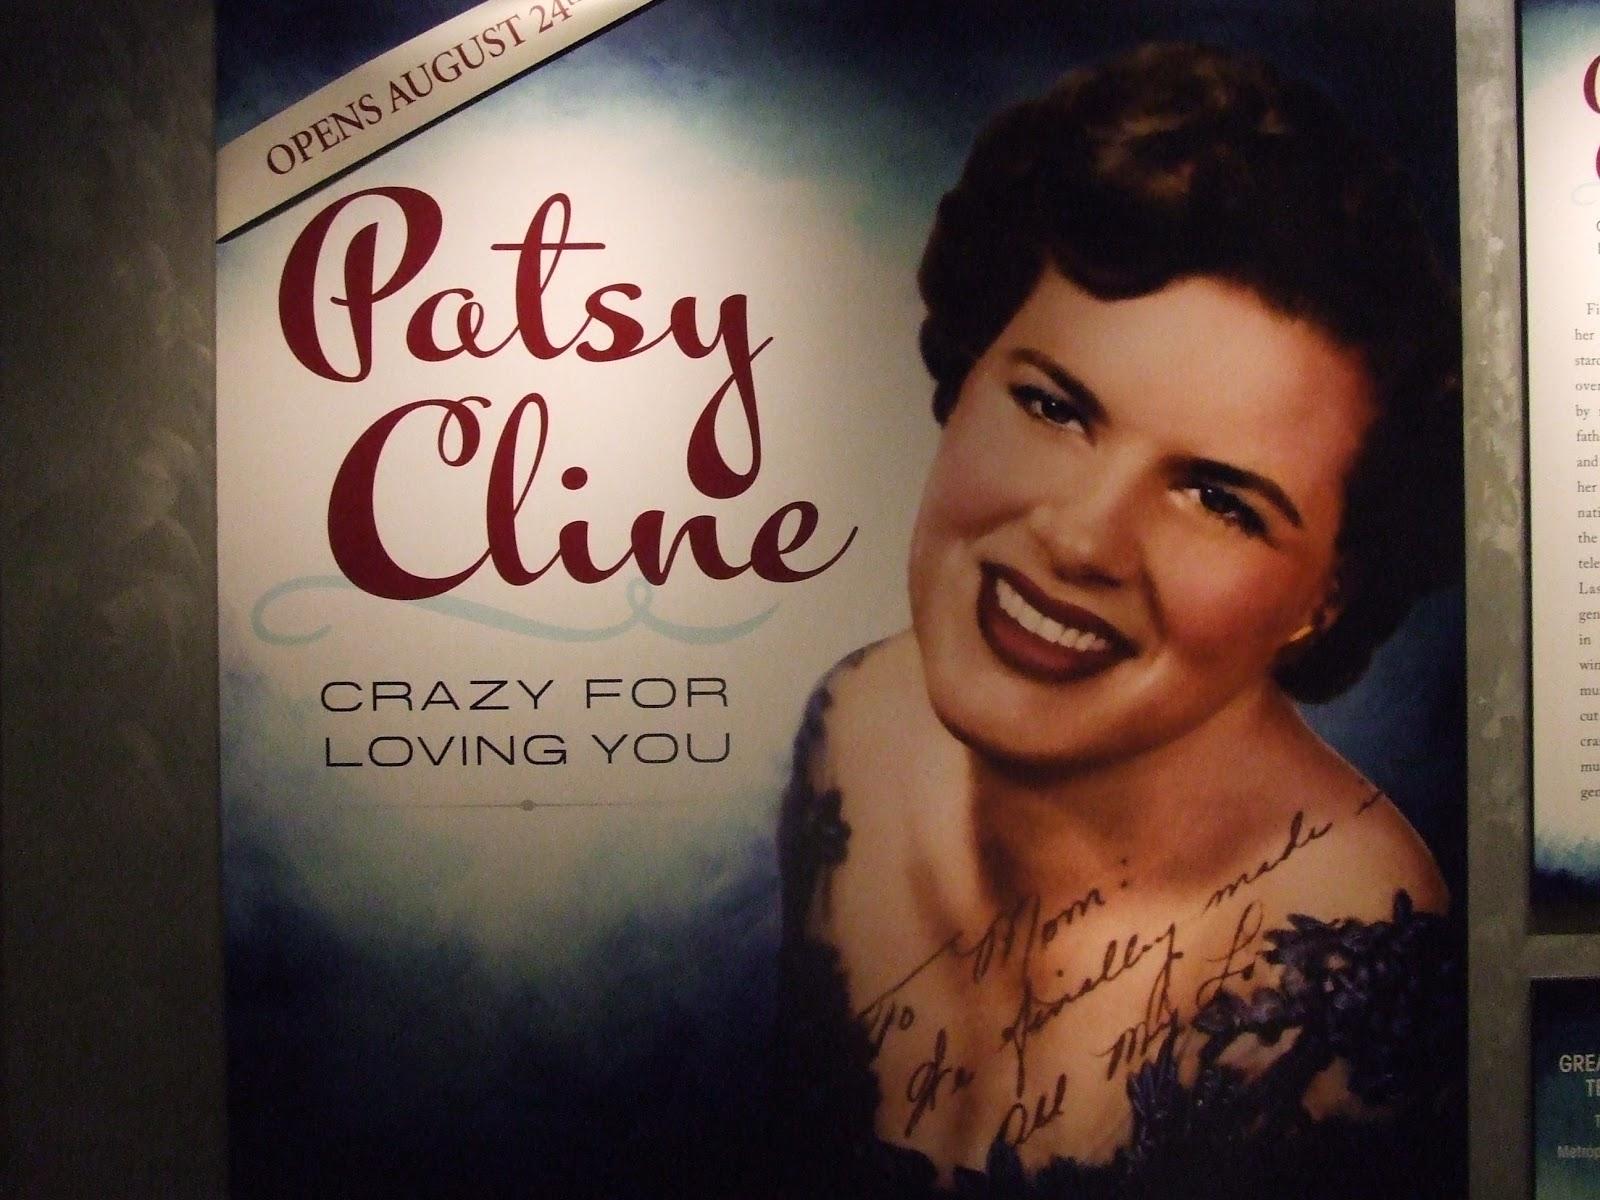 Patsy Cline, Crazy For Loving You. My written stuff